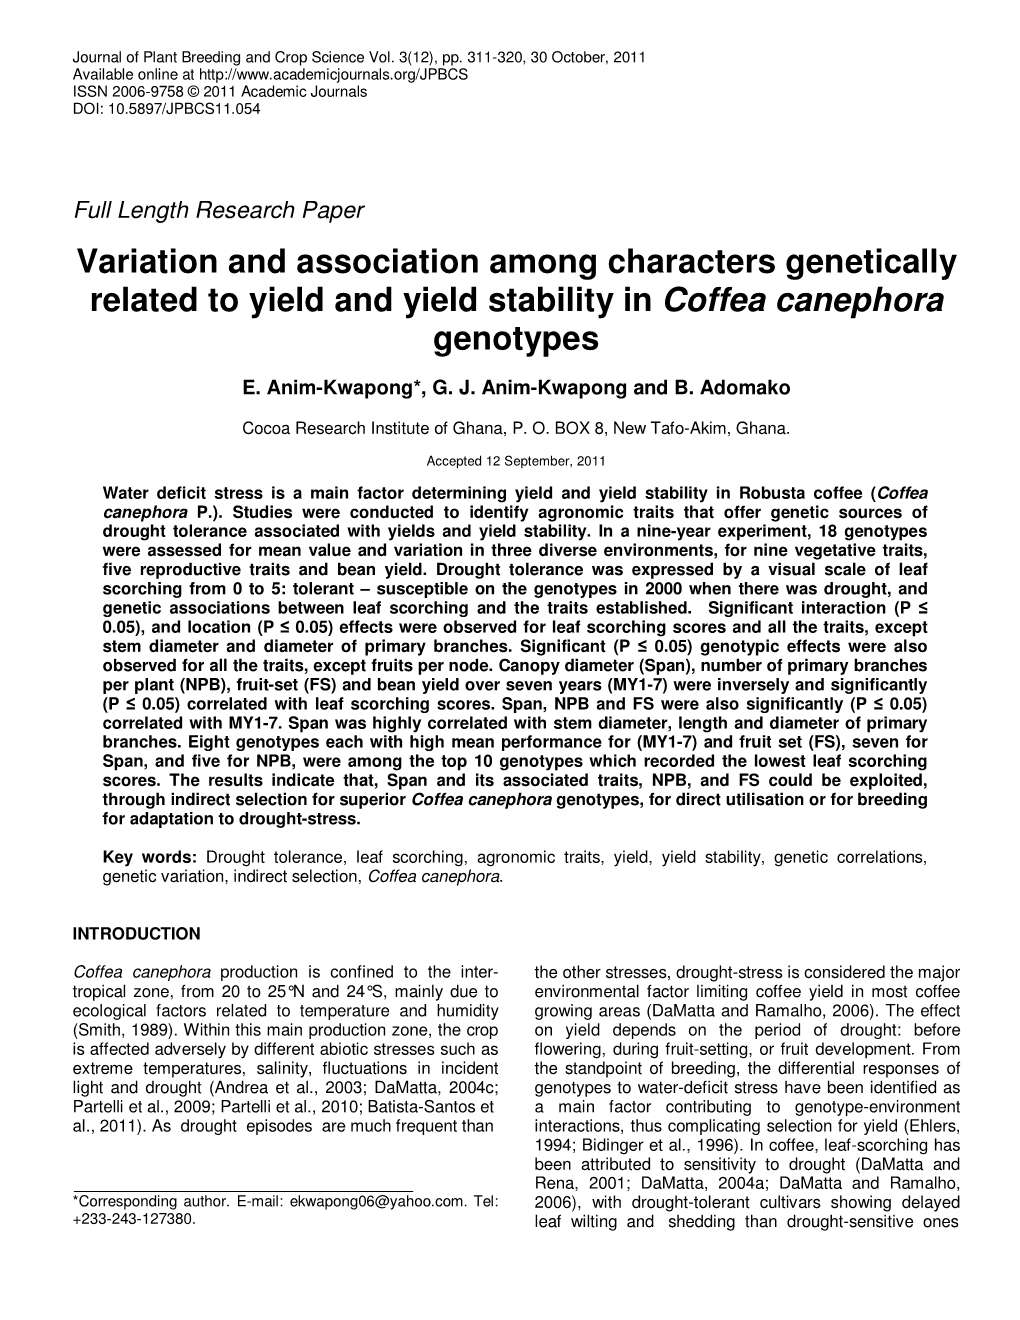 Variation and Association Among Characters Genetically Related to Yield and Yield Stability in Coffea Canephora Genotypes